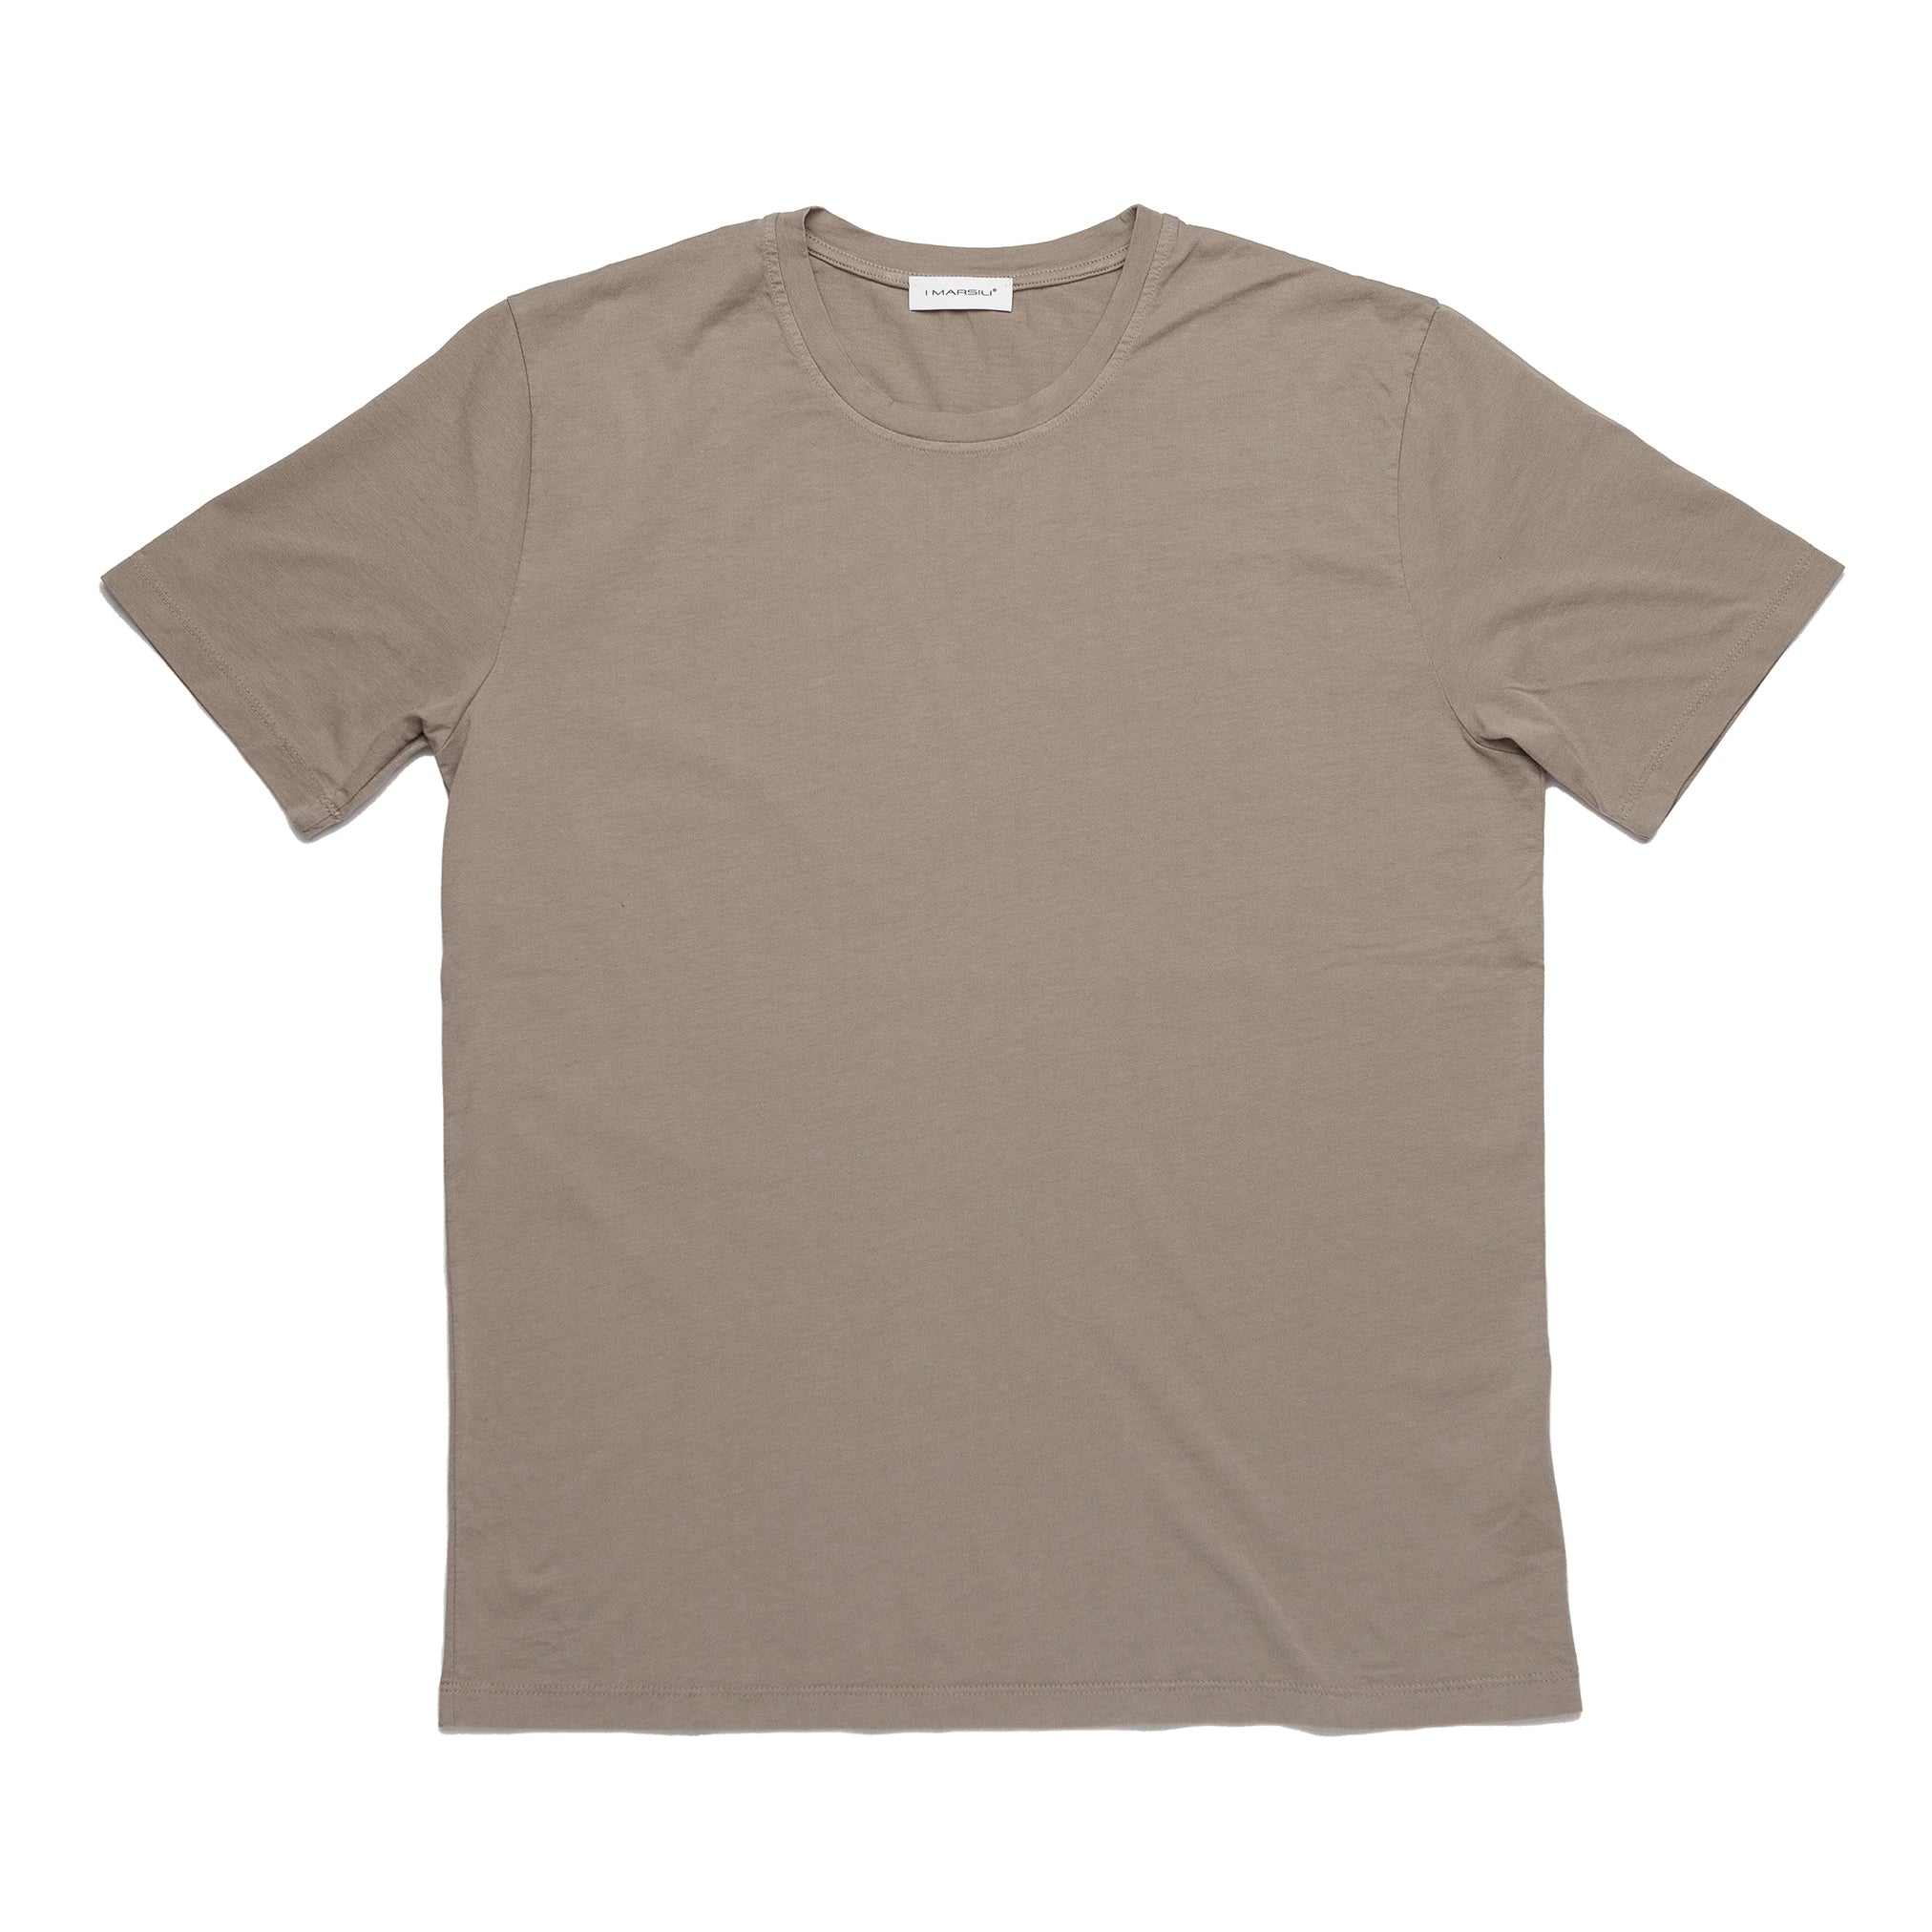 T-Shirt in Taupe